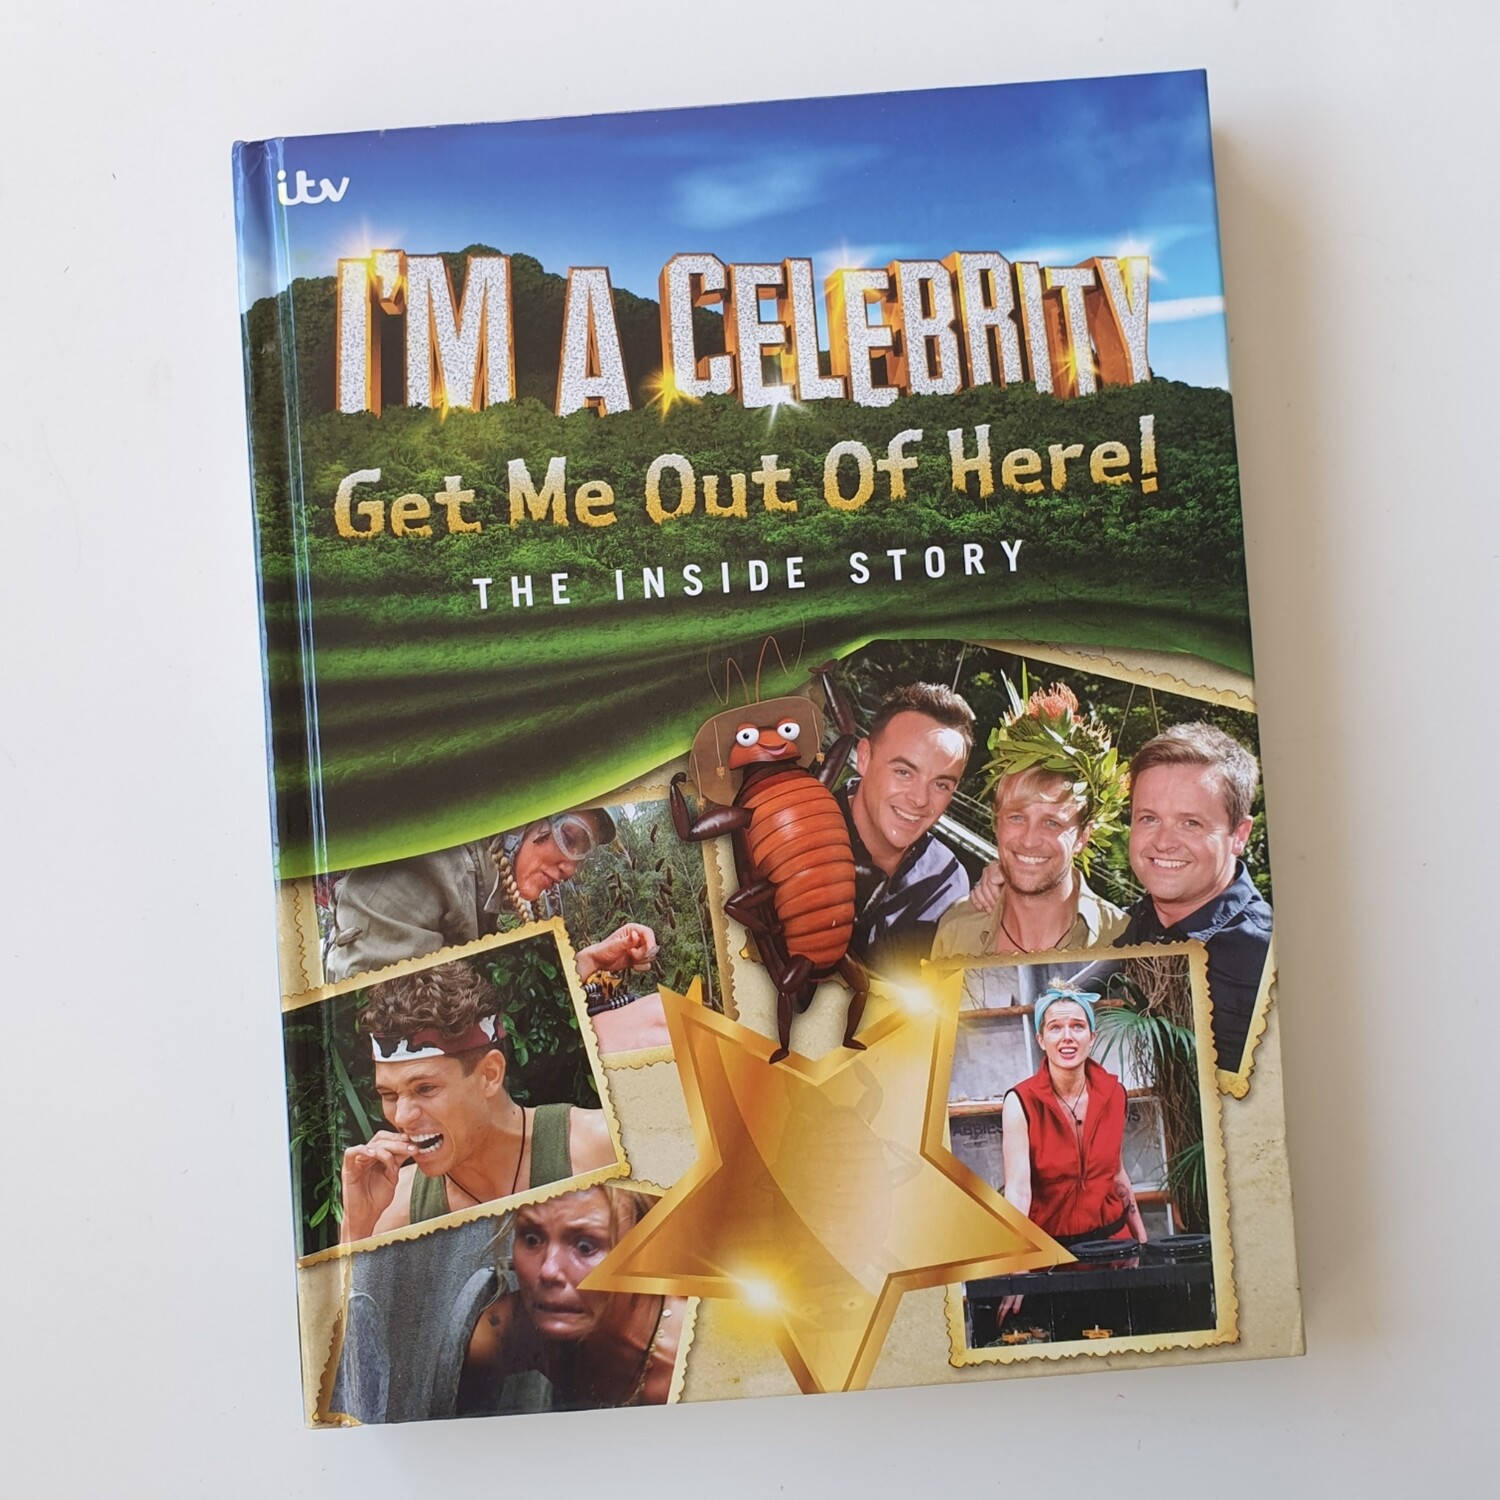 I'm a Celebrity Get me Out of Here - Ant & Dec